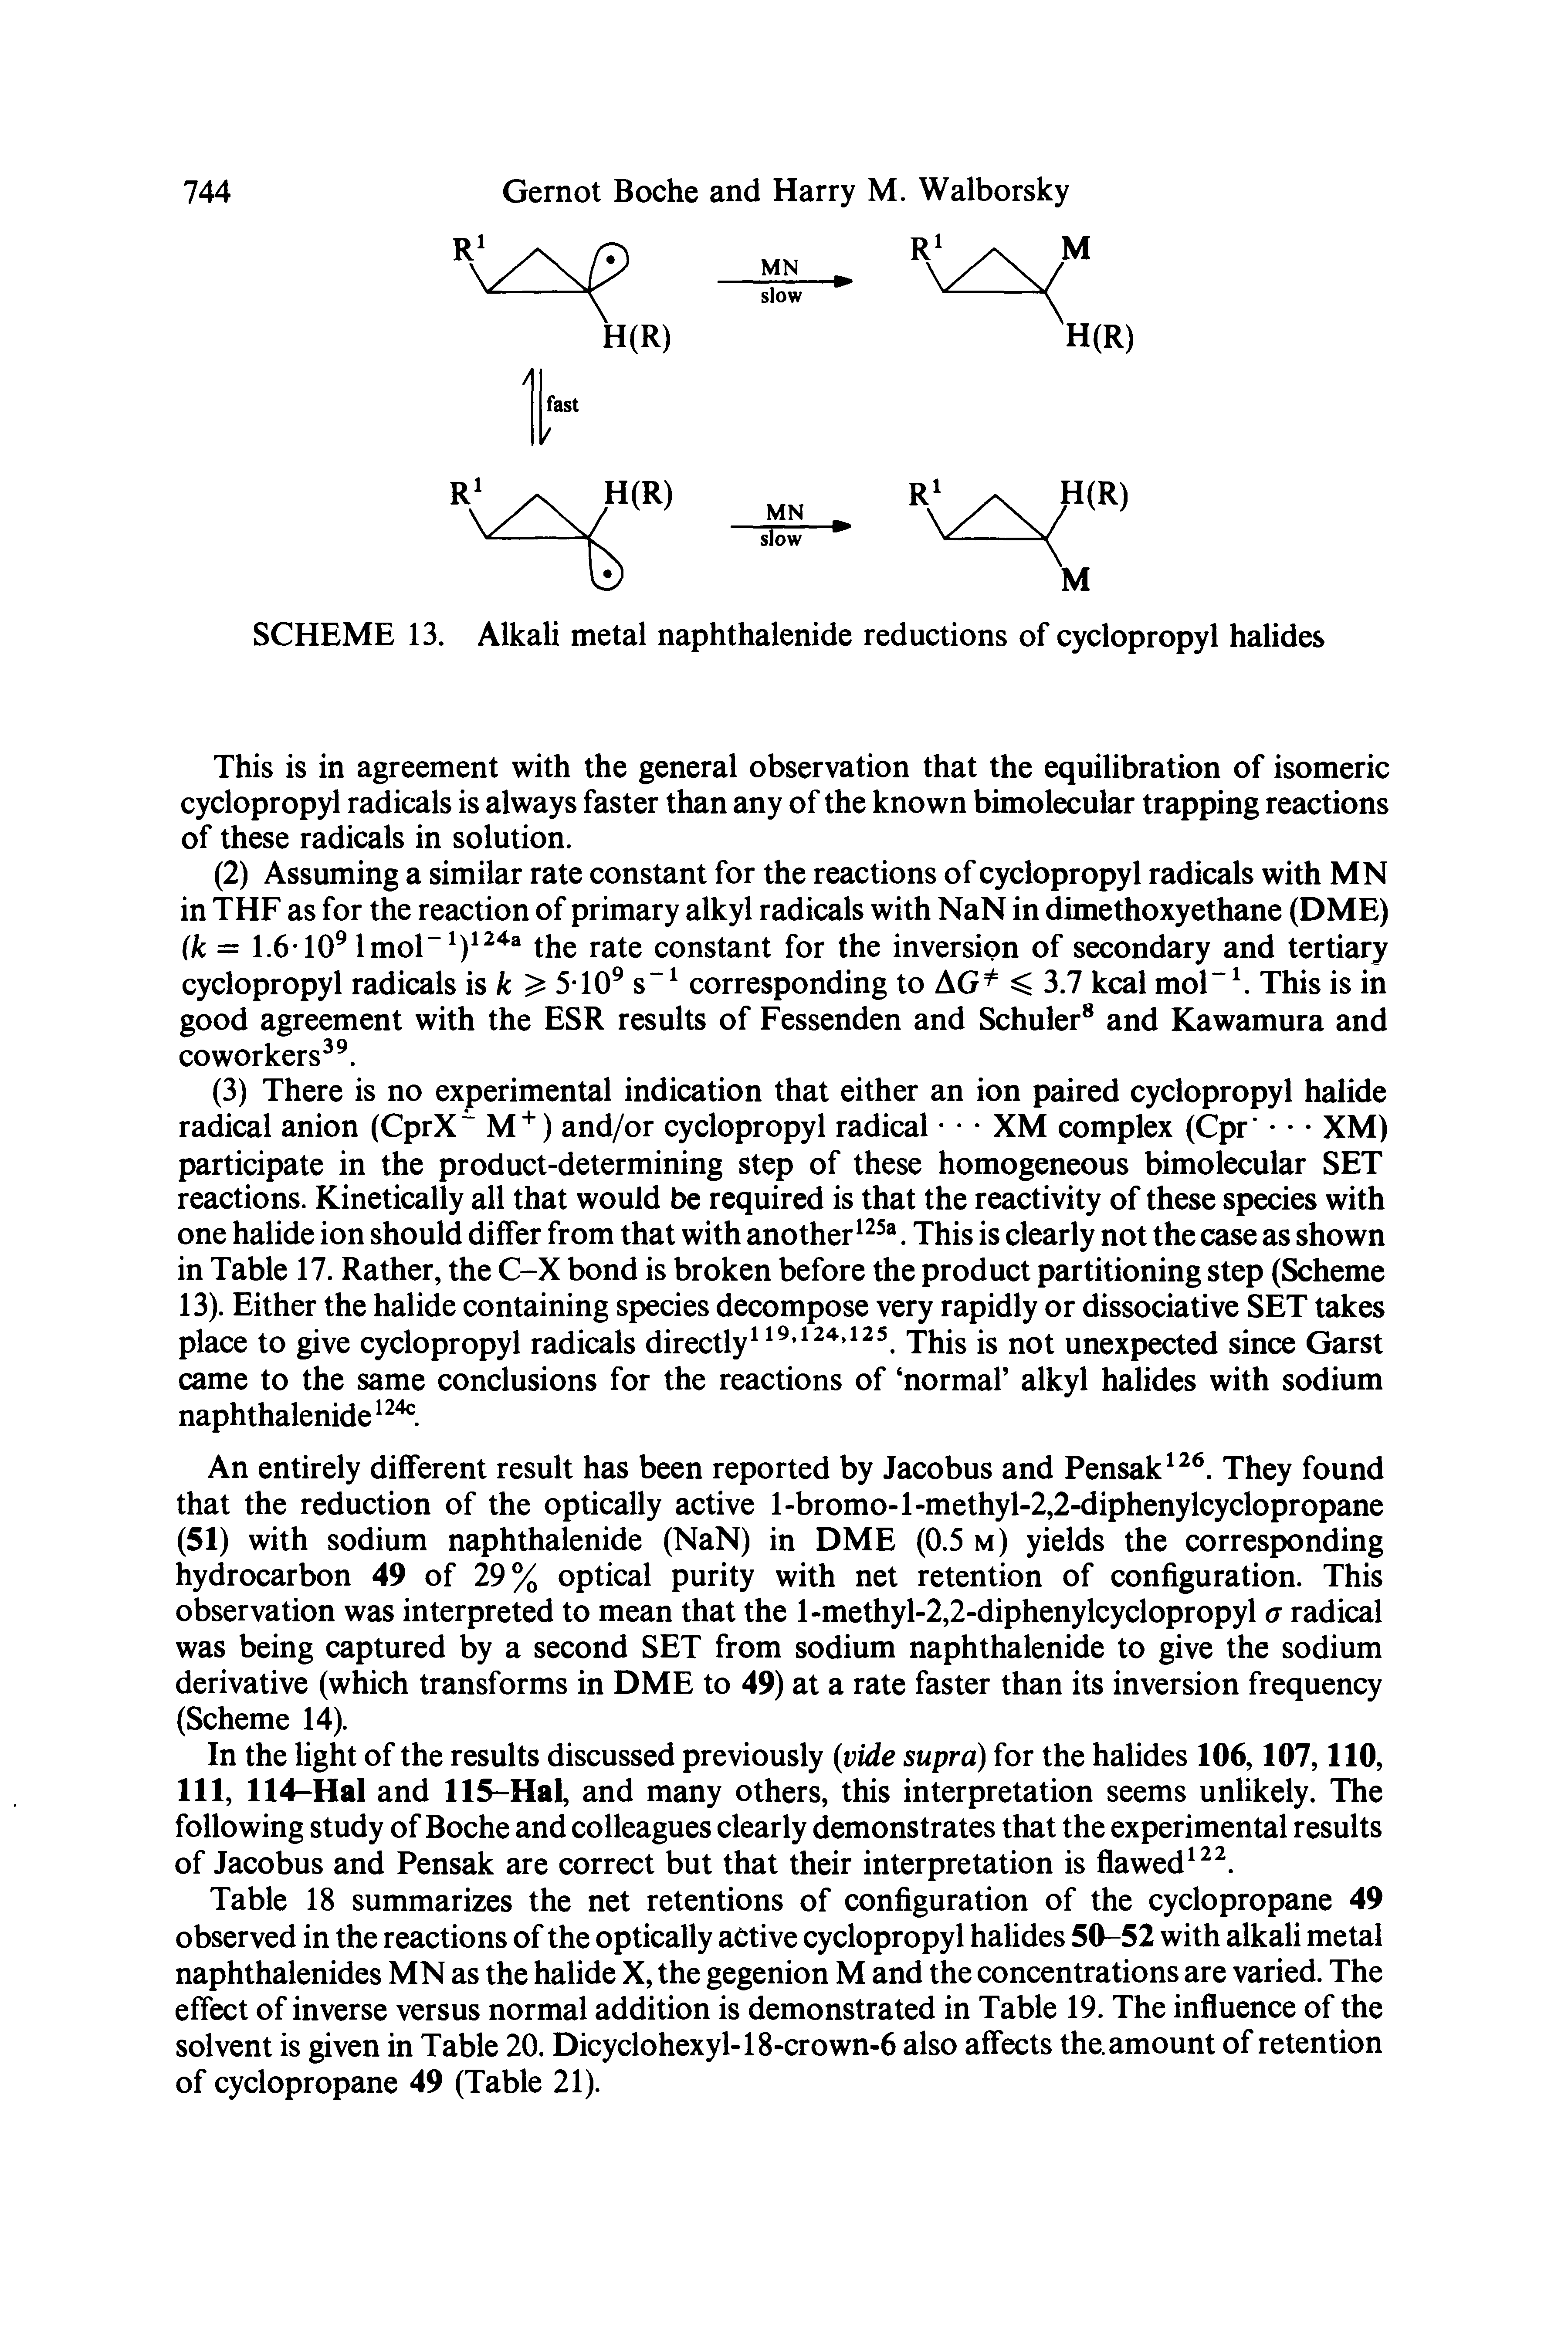 Table 18 summarizes the net retentions of configuration of the cyclopropane 49 observed in the reactions of the optically active cyclopropyl halides 5(1-52 with alkali metal naphthalenides MN as the halide X, the gegenion M and the concentrations are varied. The effect of inverse versus normal addition is demonstrated in Table 19. The influence of the solvent is given in Table 20. Dicyclohexyl-18-crown-6 also affects the. amount of retention of cyclopropane 49 (Table 21).